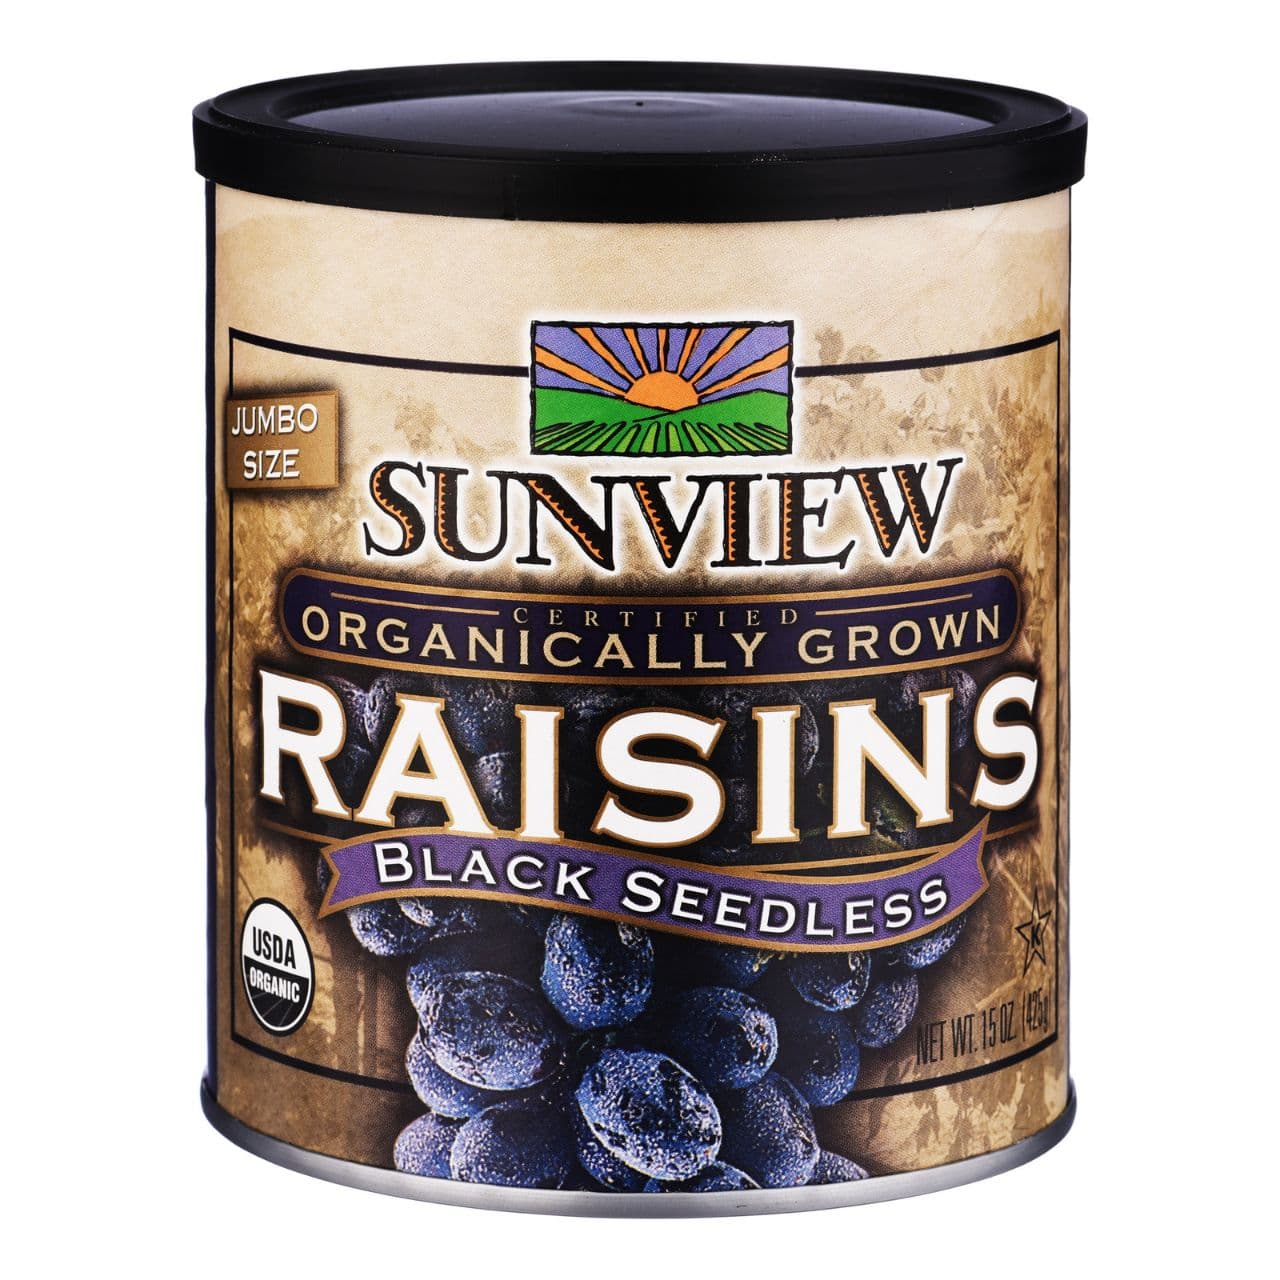 09.Raisin made with black seedless grapes